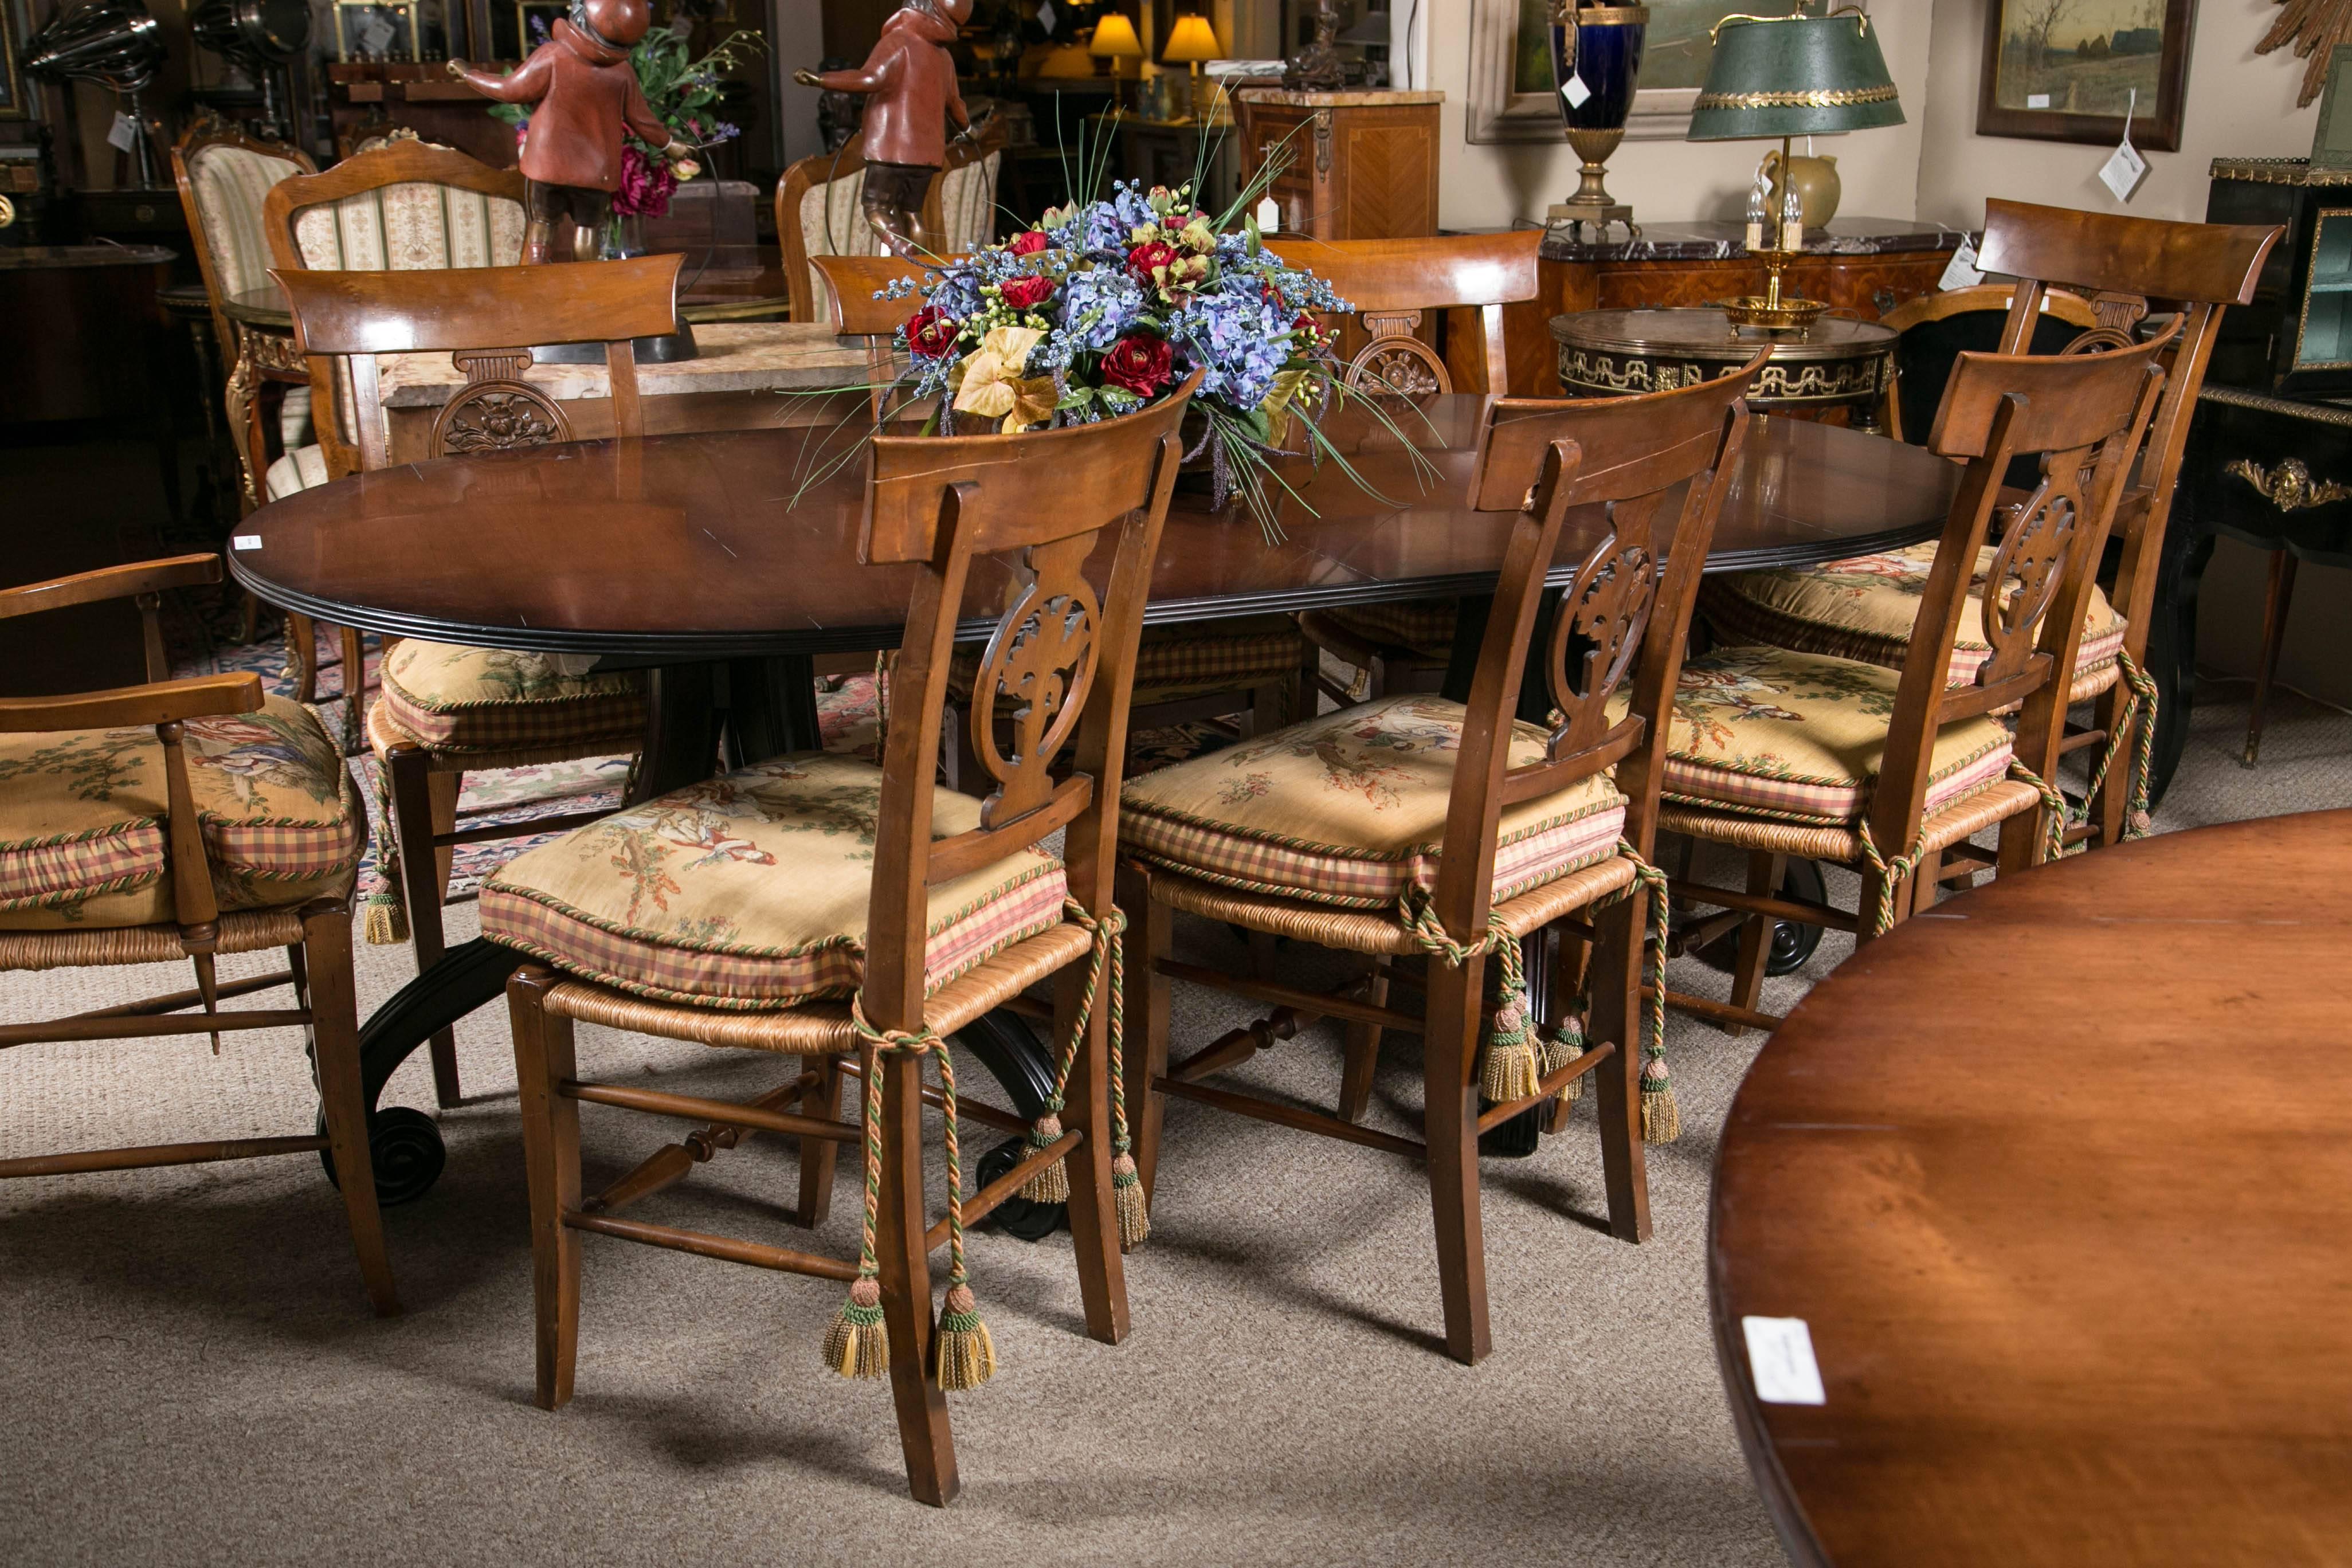 Ralph Lauren scroll base Jack Phillips design Caroline dining table. This is one solid table having a tripod double pedestal base supporting a solid wood top. The dimensions are wonderfully made to seat up to 8 comfortably.

From a recently acquired